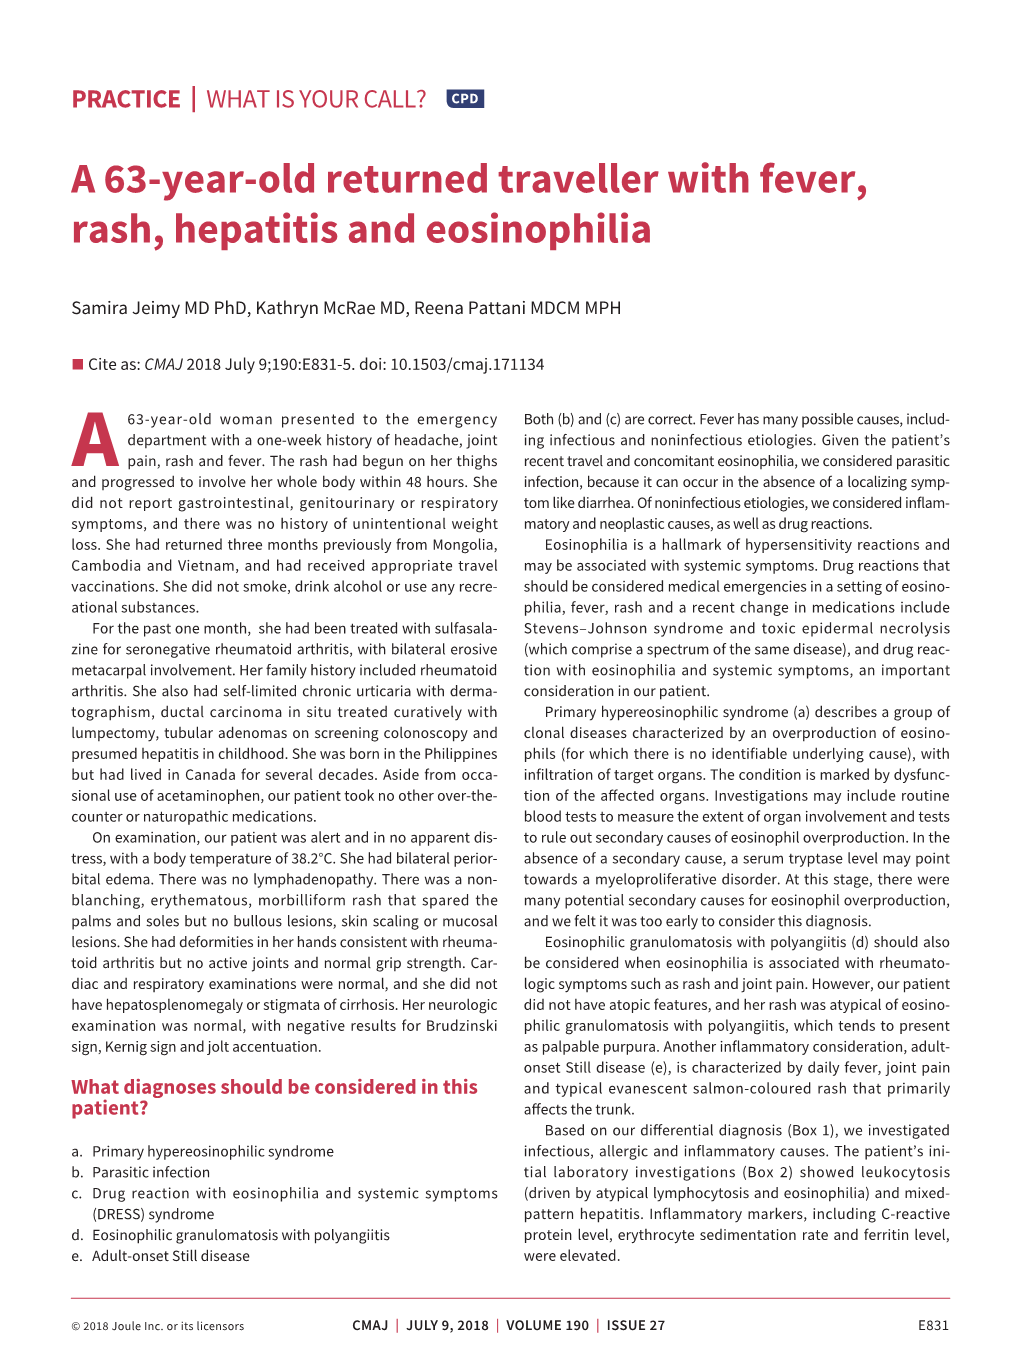 A 63-Year-Old Returned Traveller with Fever, Rash, Hepatitis and Eosinophilia